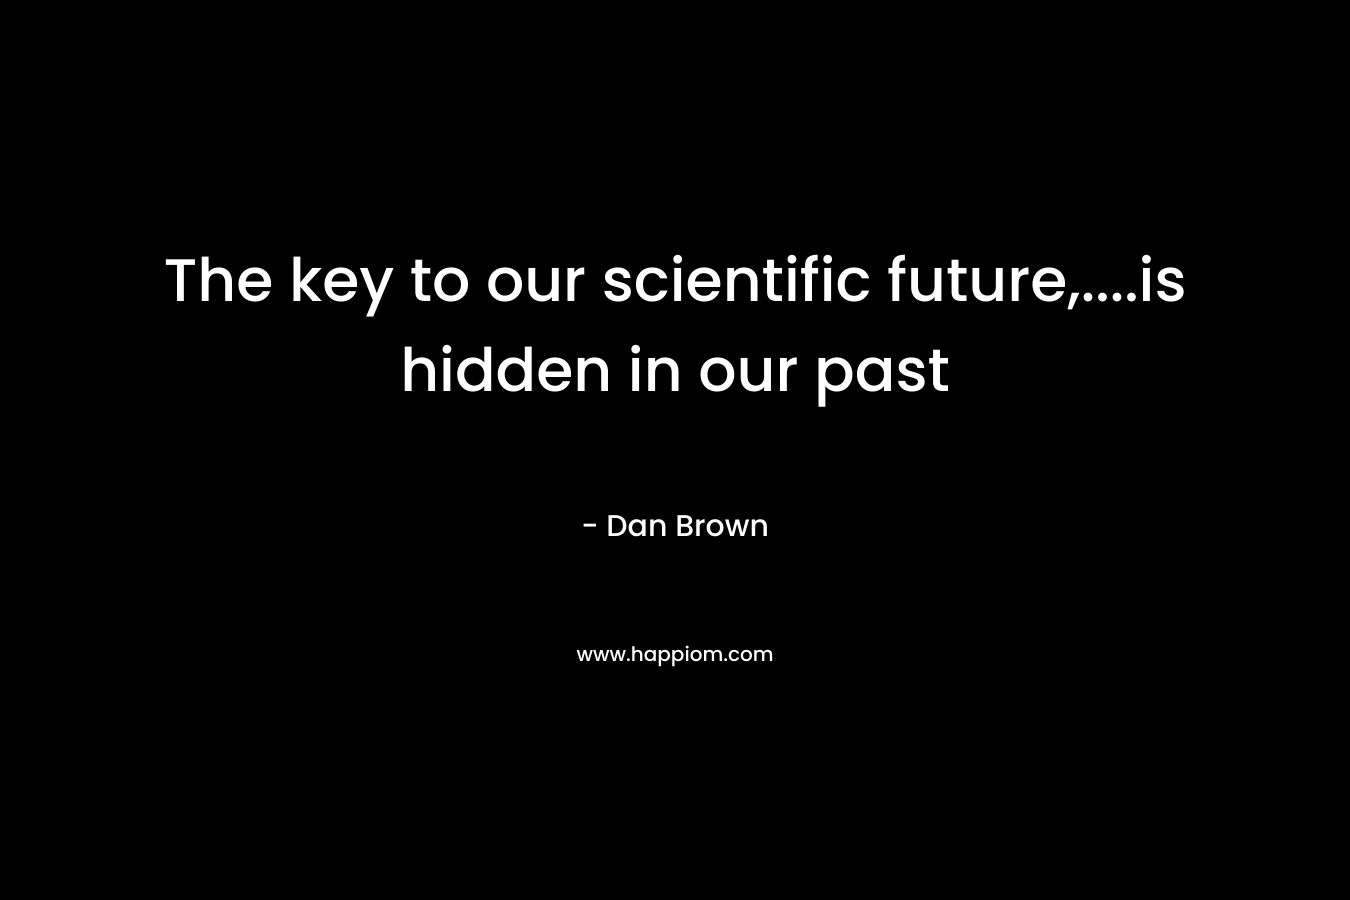 The key to our scientific future,....is hidden in our past